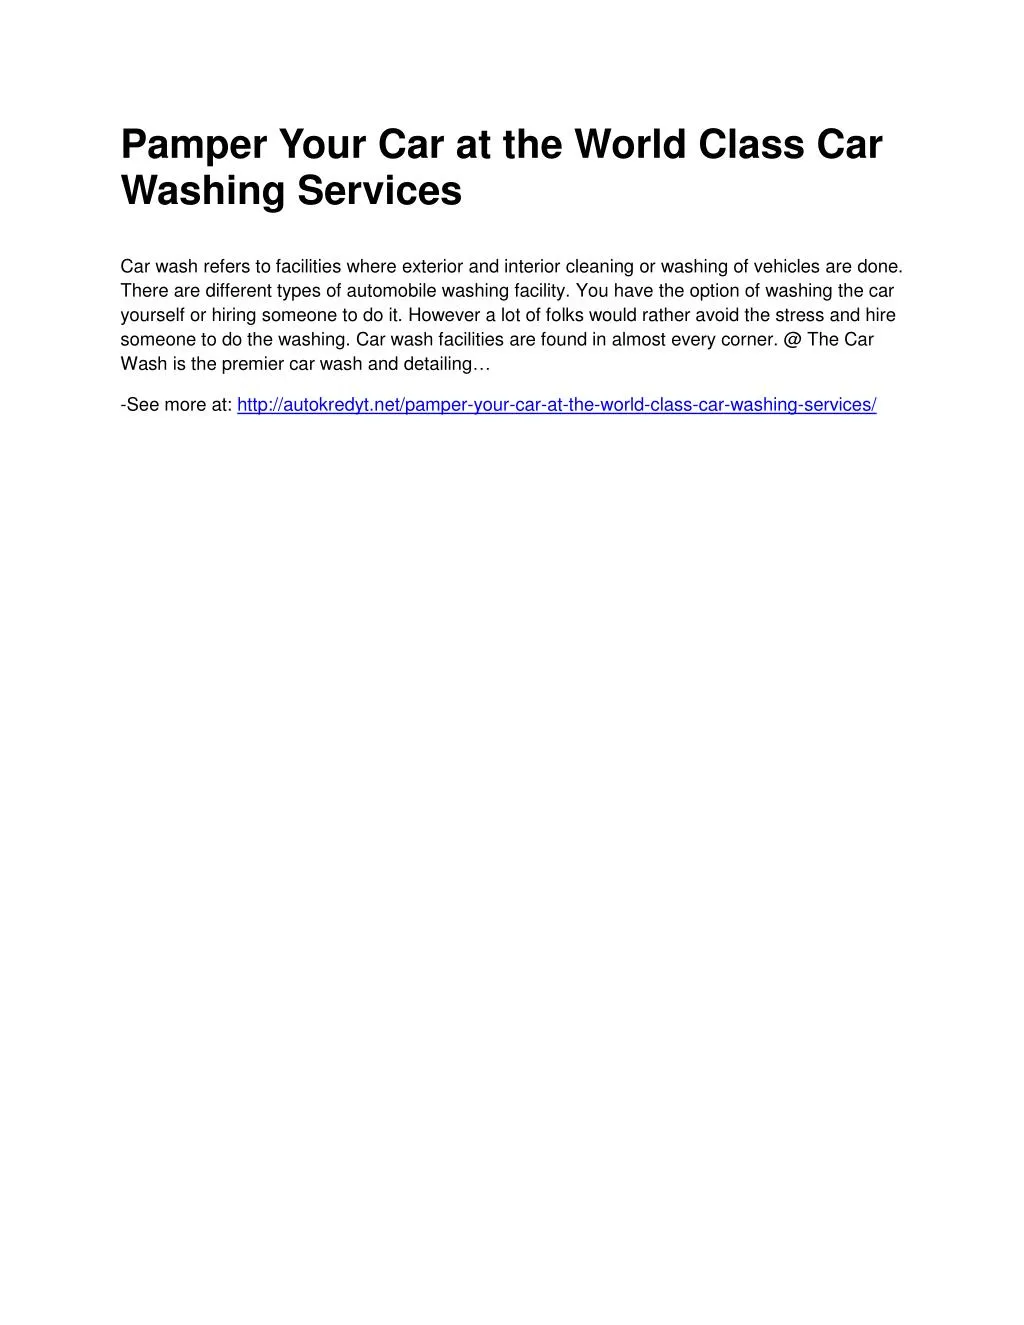 pamper your car at the world class car washing